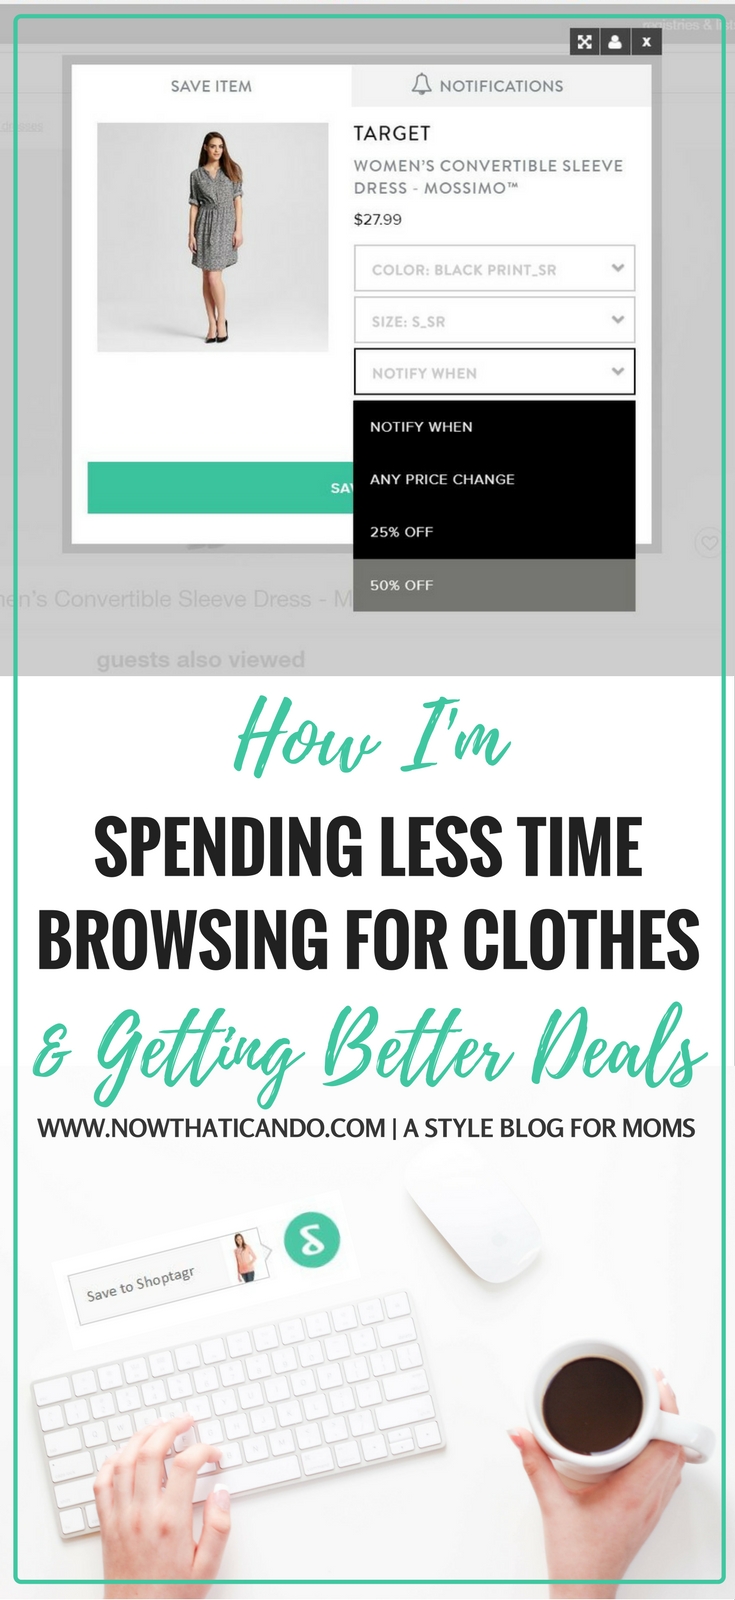 How to never pay full price for clothes you need! Shoptagr is such an awesome tool! I wish I knew about it sooner. Click through to learn more about it!